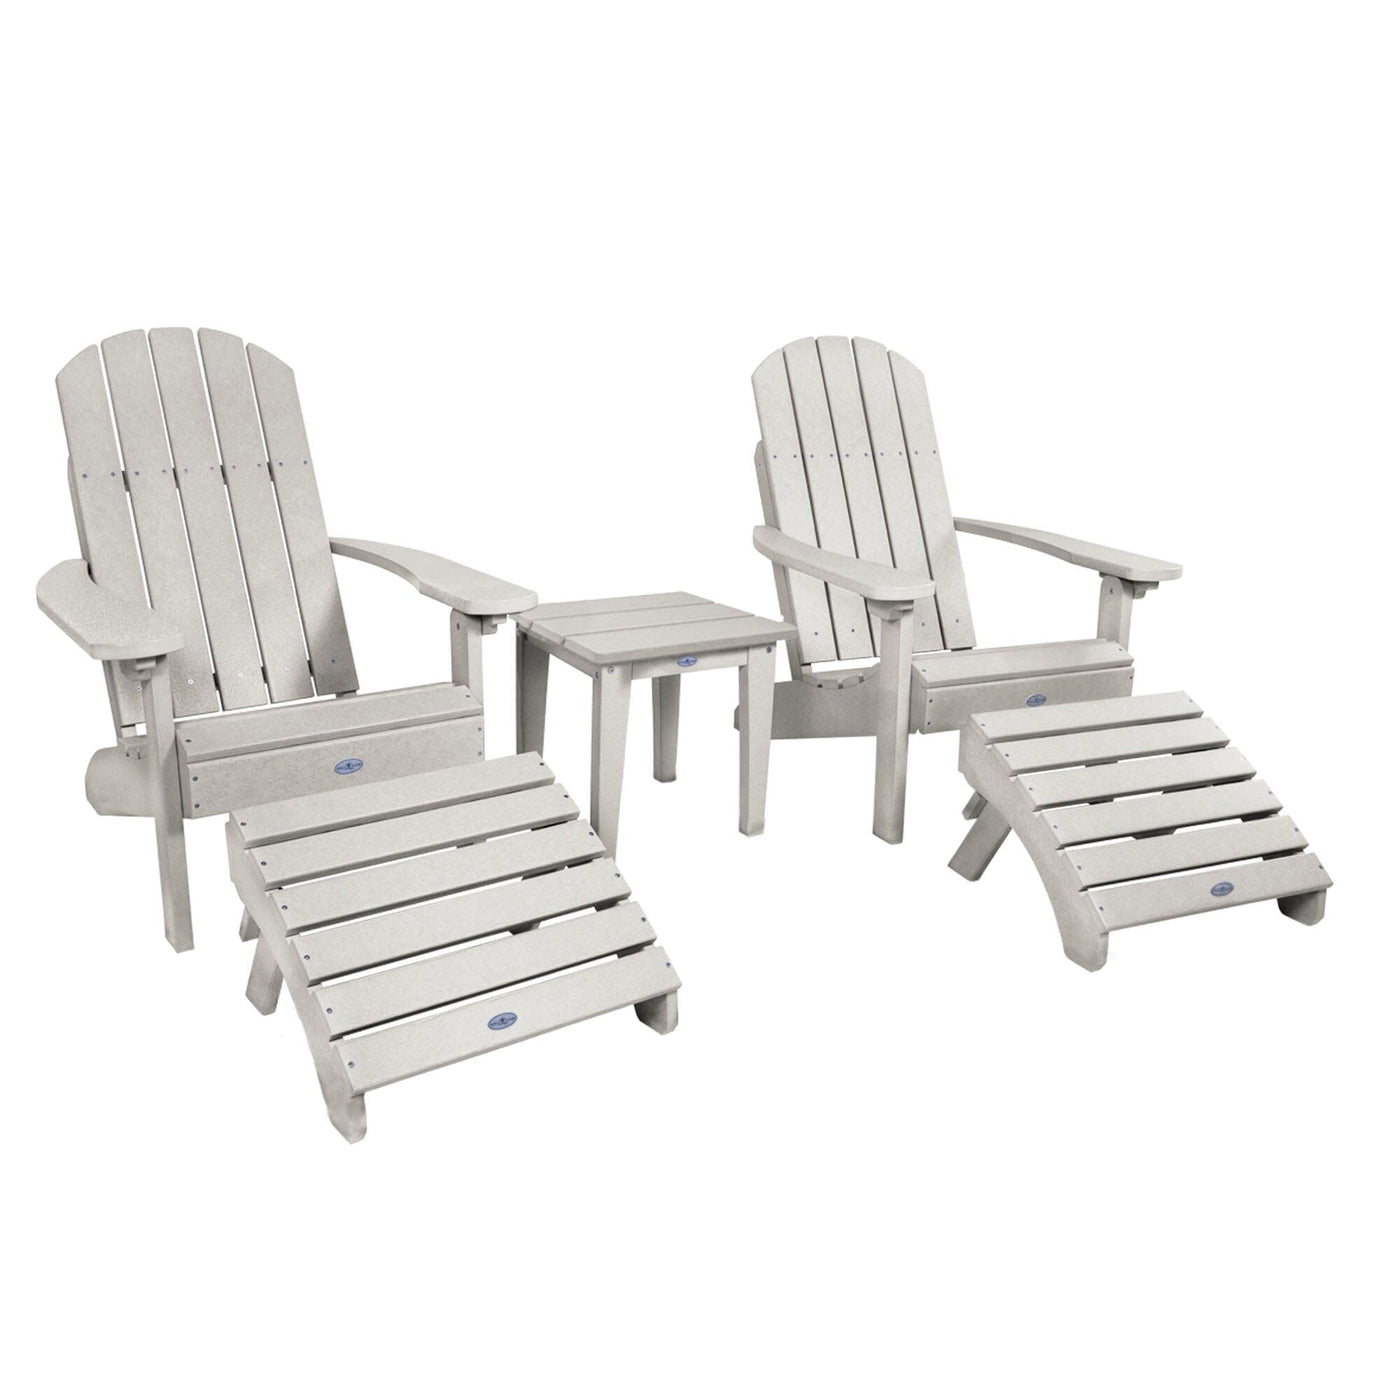 Two Cape Classic Adirondack Chairs, Side Table and Ottoman 5 pc Set Kitted Set Bahia Verde Outdoors Cove Gray 